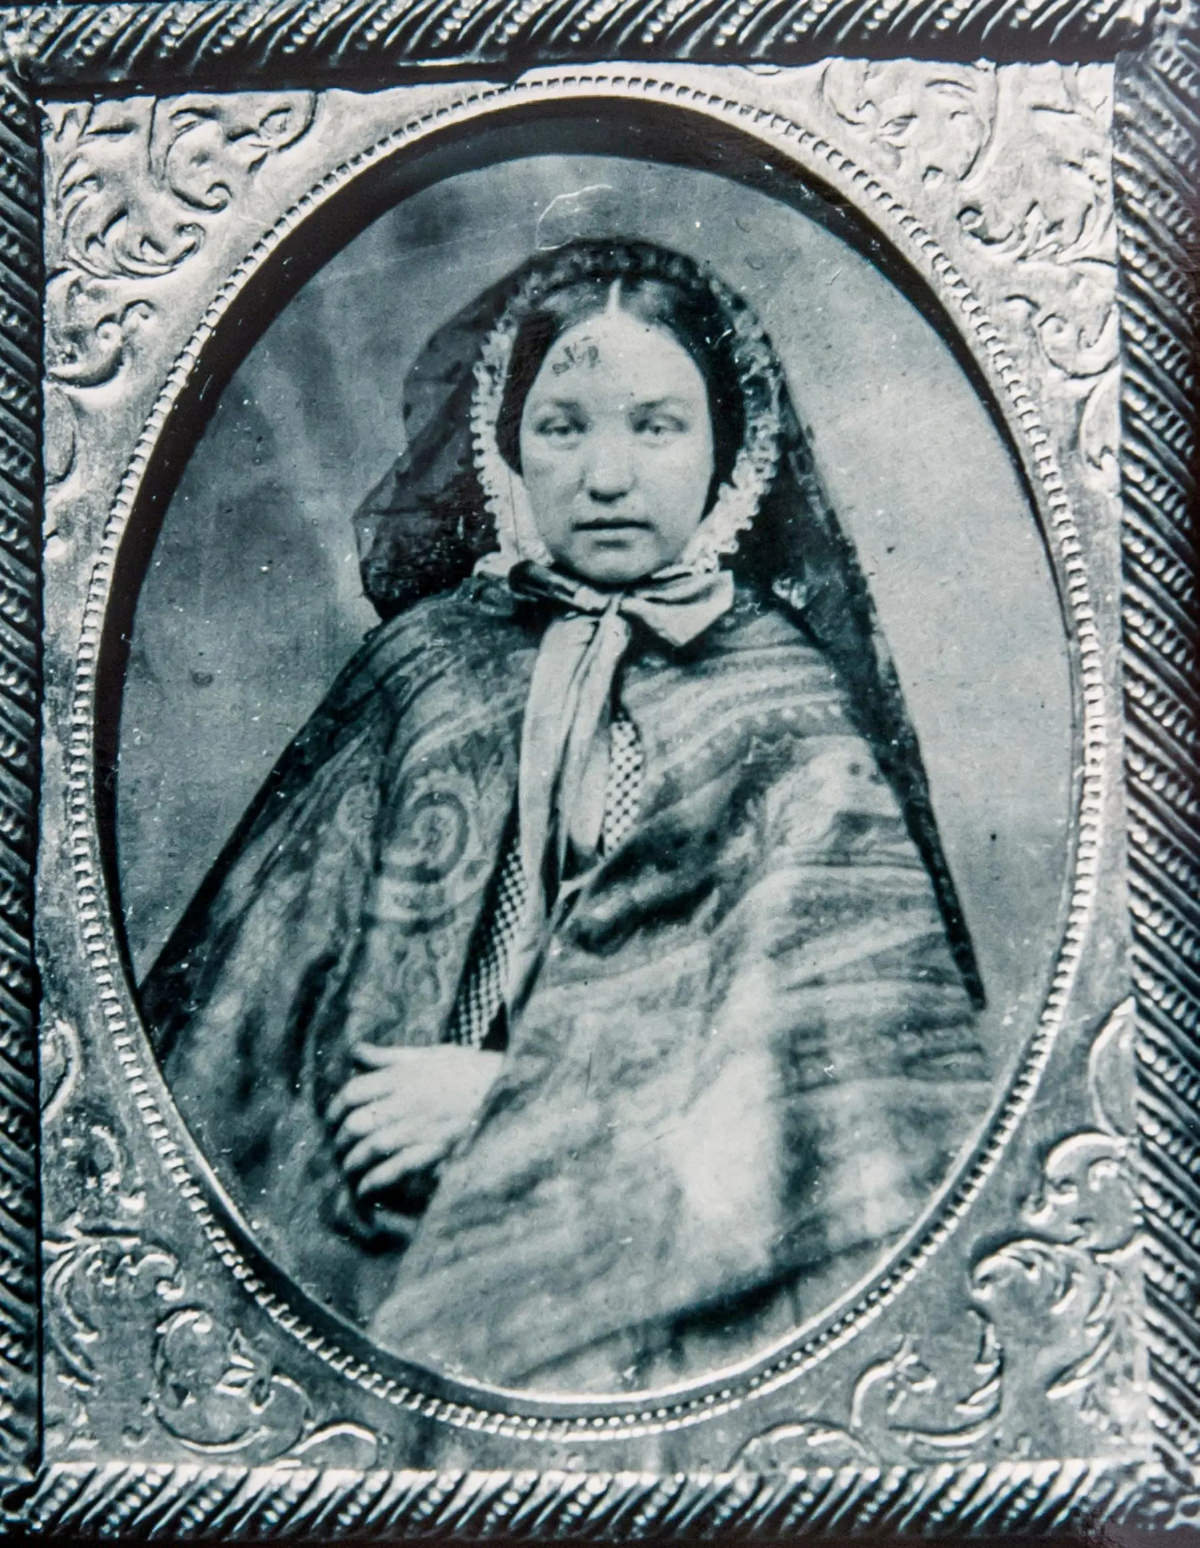 A mugshot of an unknown woman.